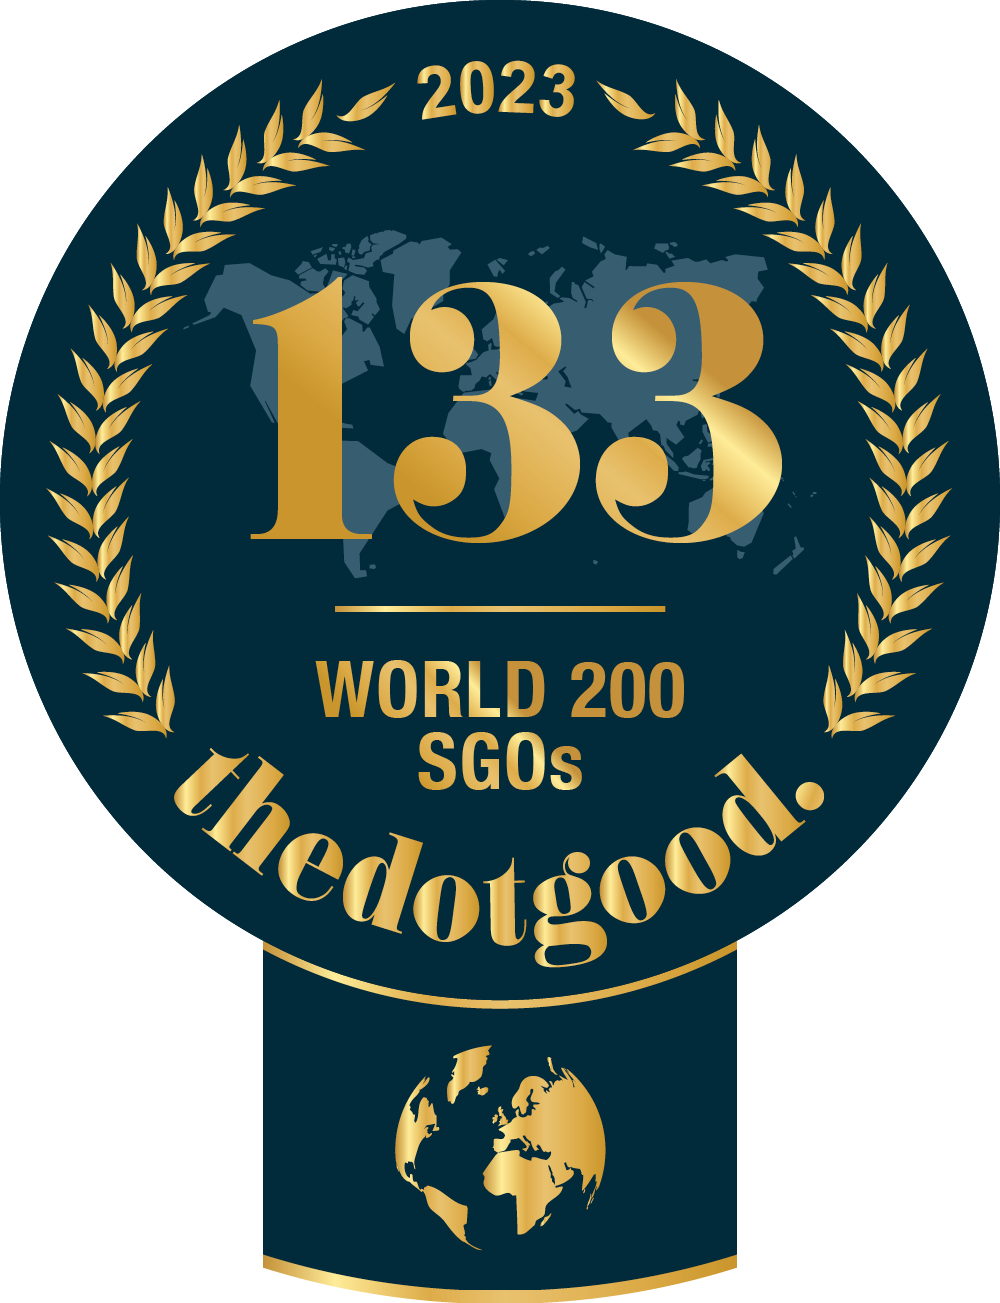 THE WOMANITY FOUNDATION is world ranked on thedotgood.